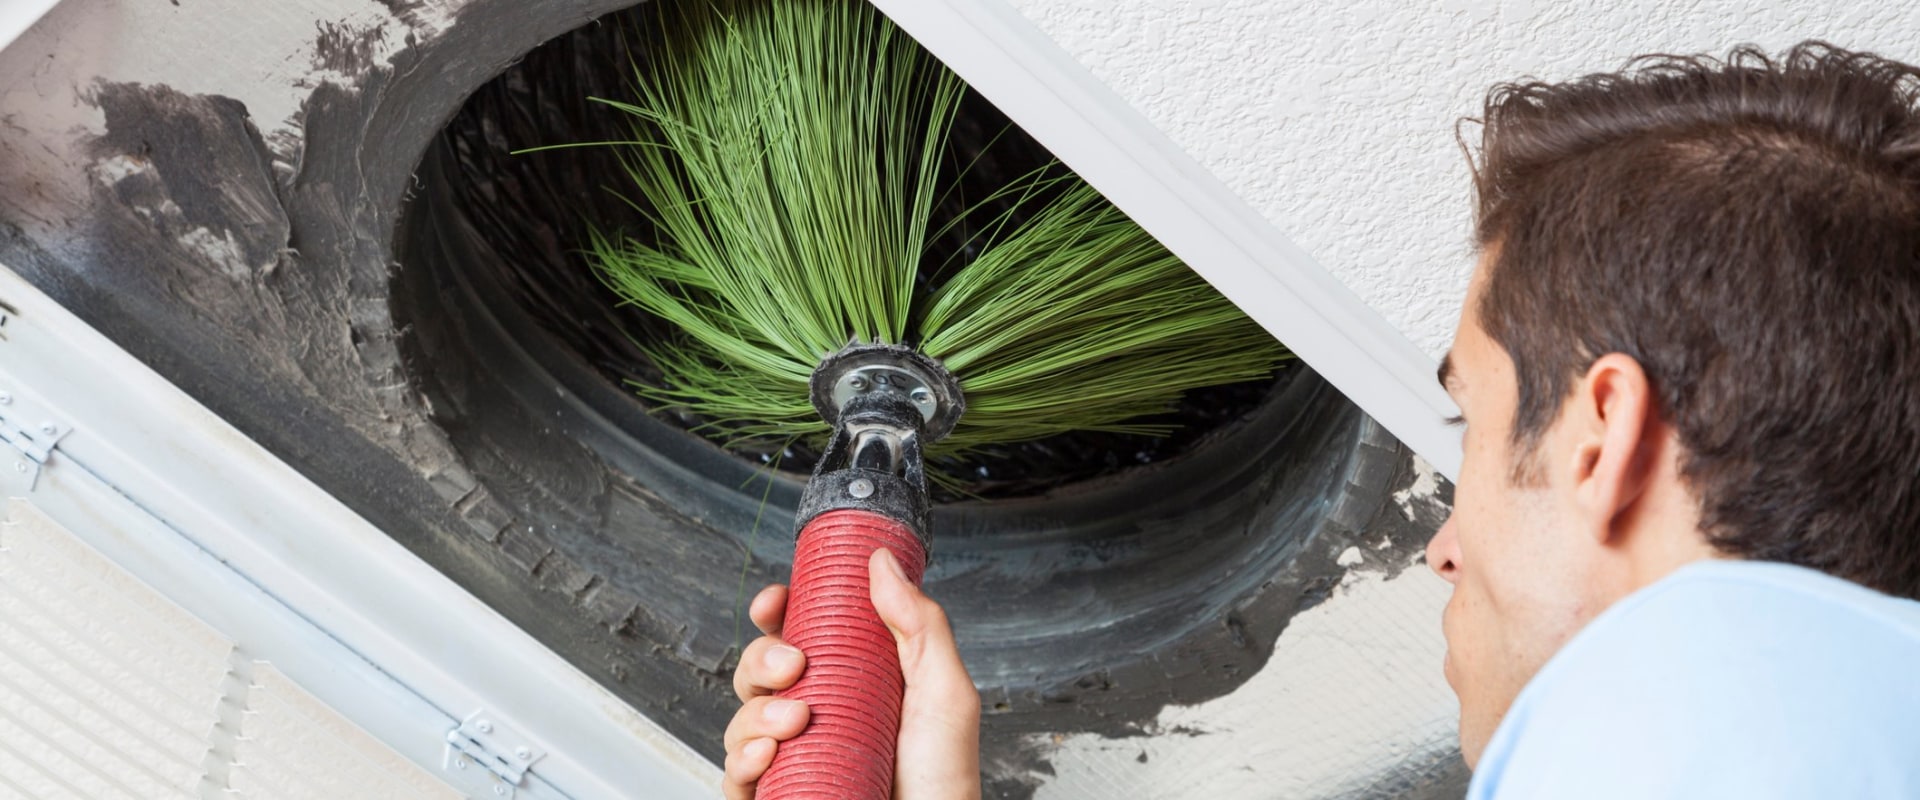 Does Cleaning Ducts Improve Airflow? - An Expert's Perspective